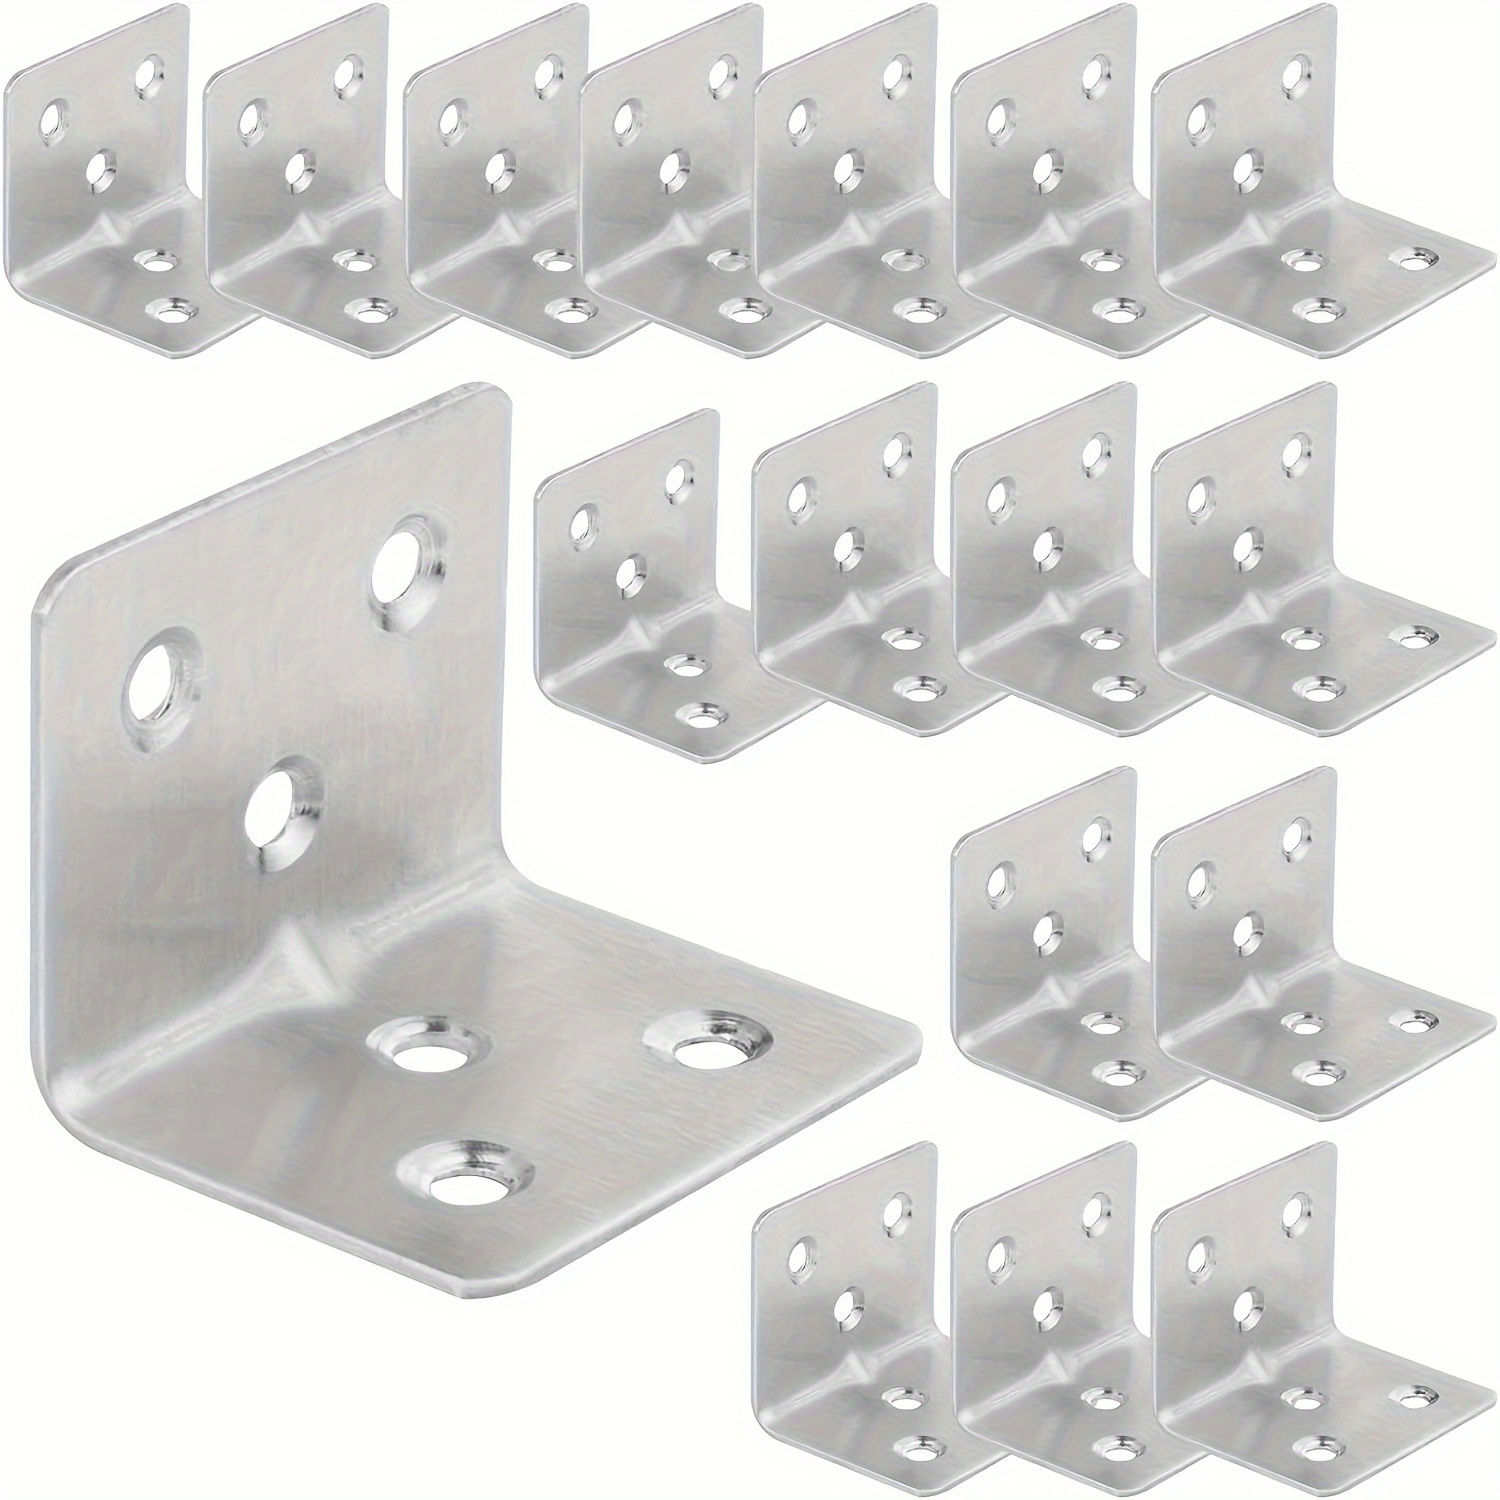 

20-pack Heavy Duty Stainless Steel Corner Braces, 1.5"x1.2" L-shaped Brackets With Screws - Ideal For Wood Furniture, Windows, Cabinets & Tables